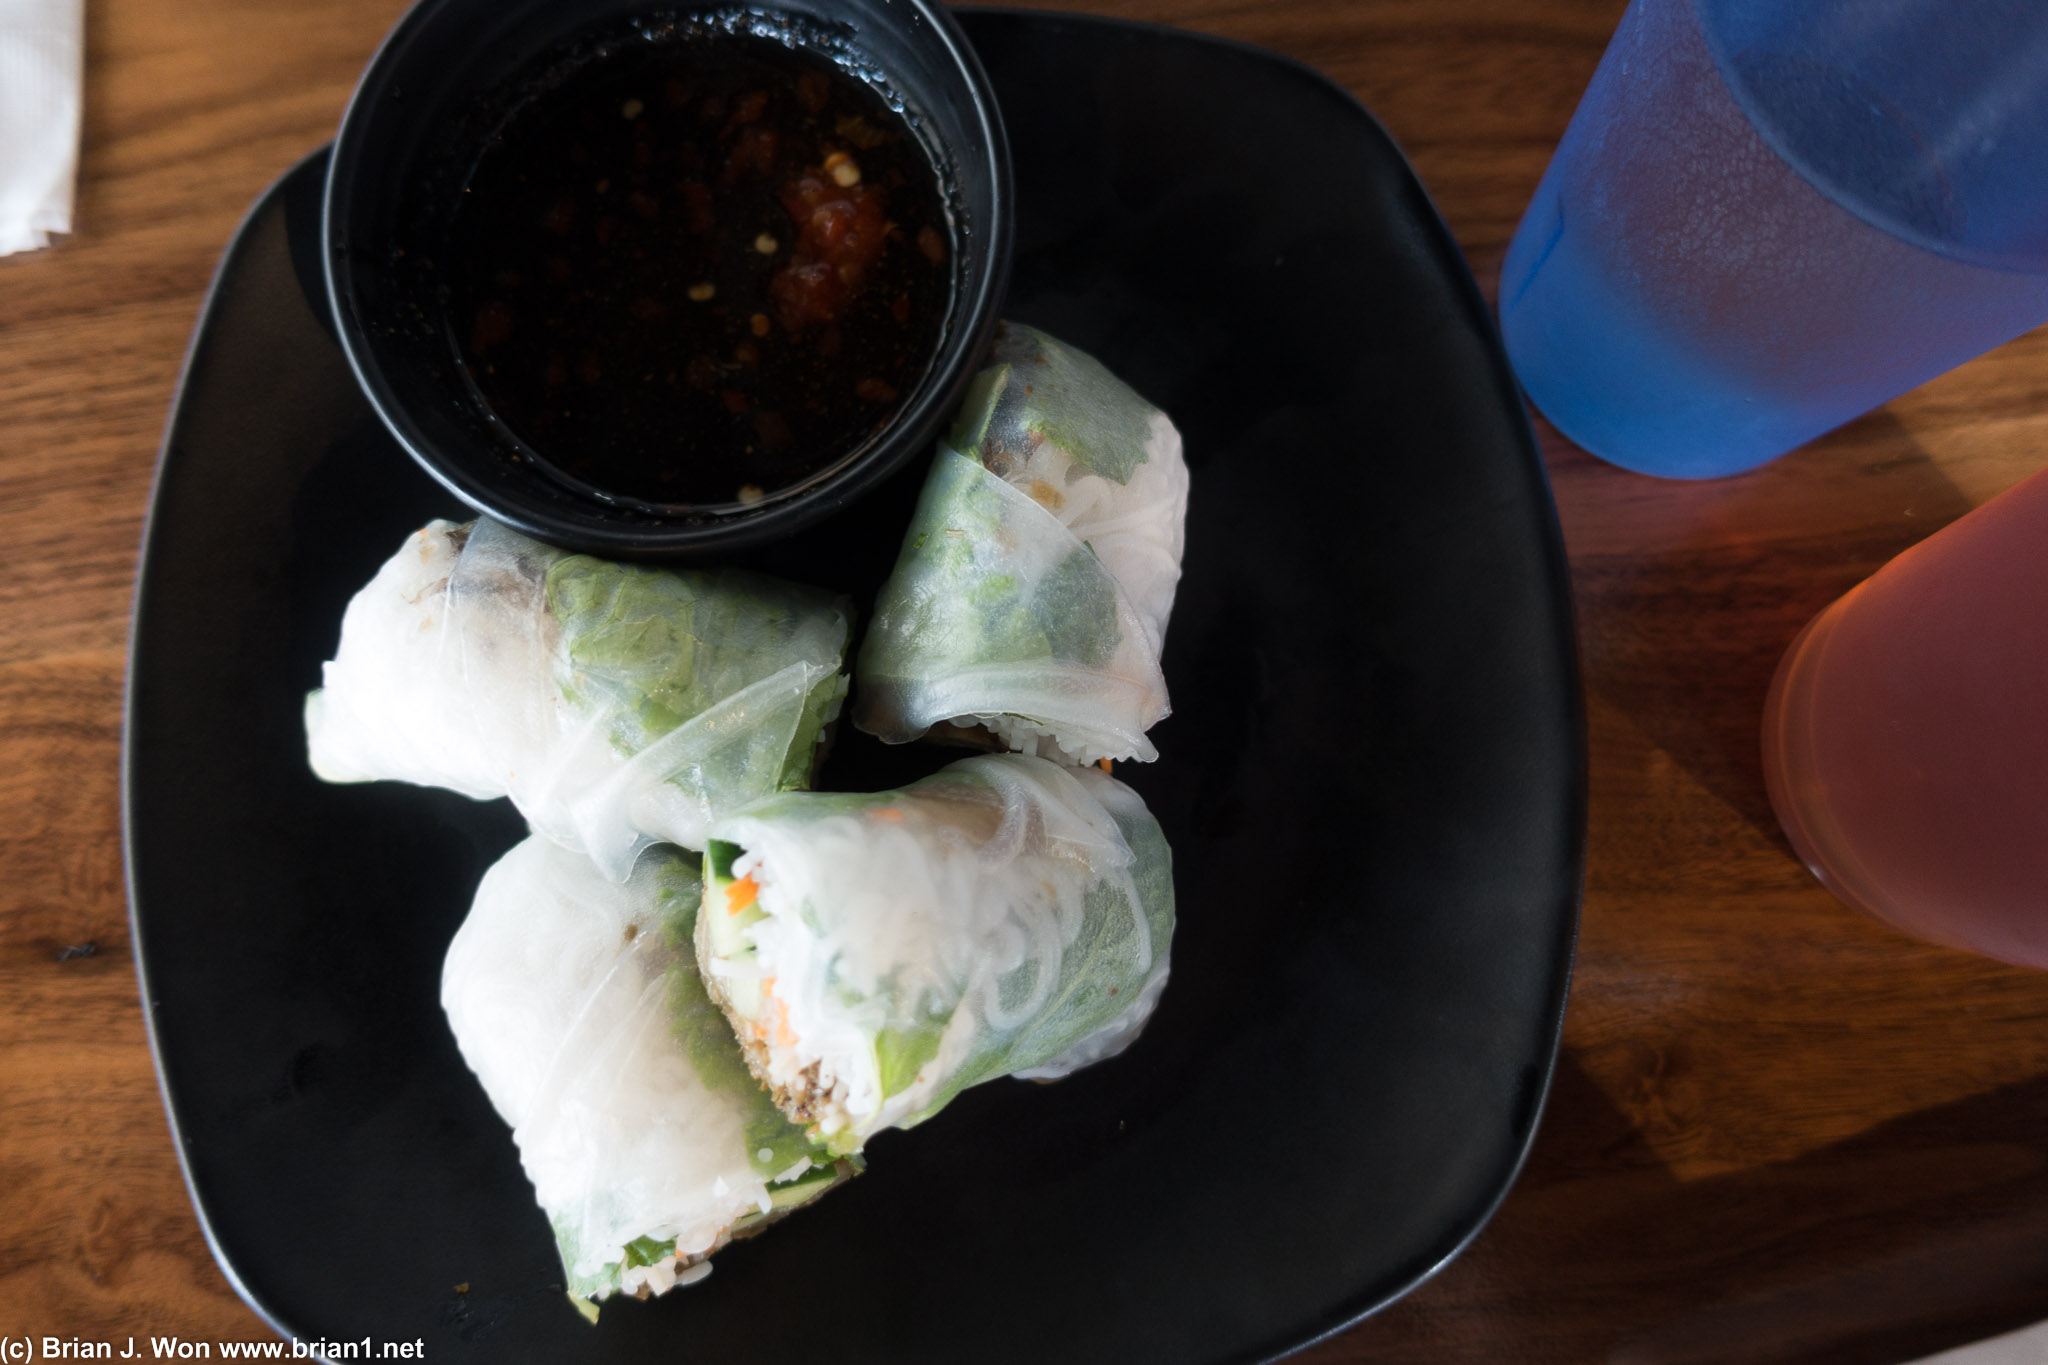 Spring rolls aren't quite right, but they're not bad either.